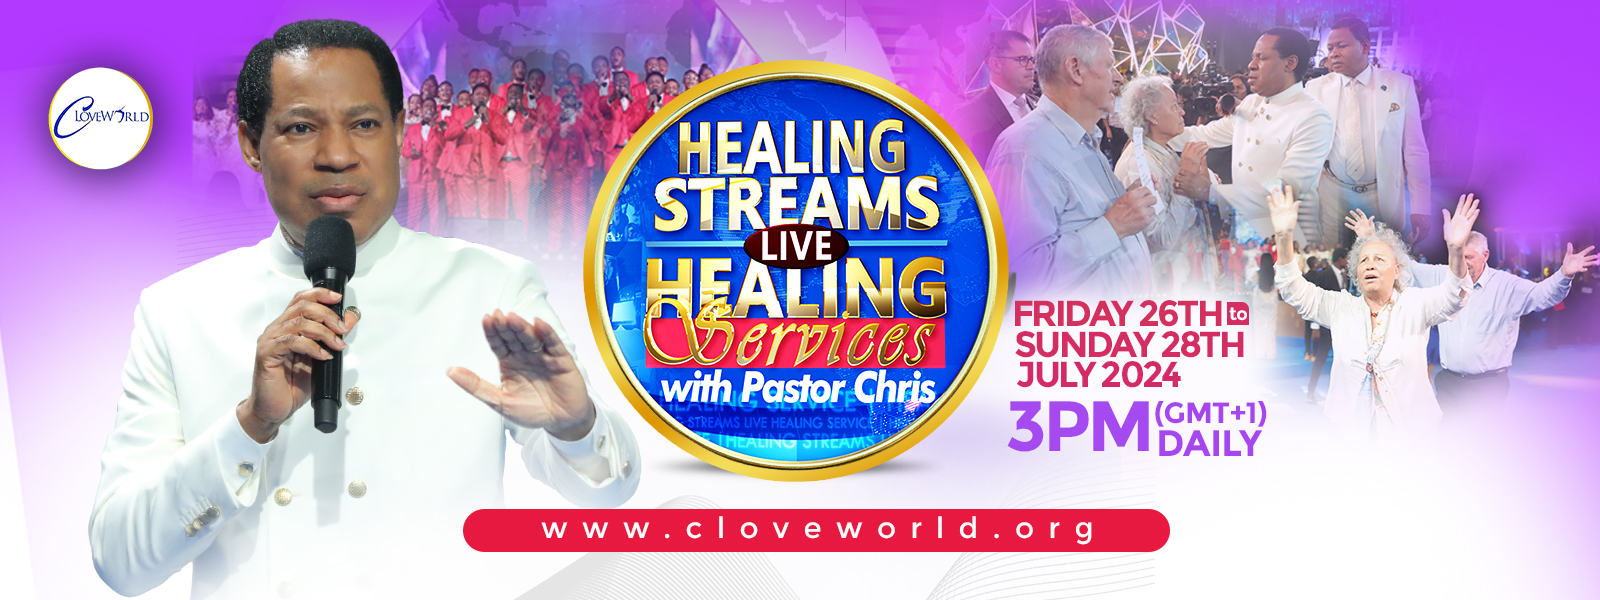 HEALING STREAMS LIVE WITH PASTOR CHRIS